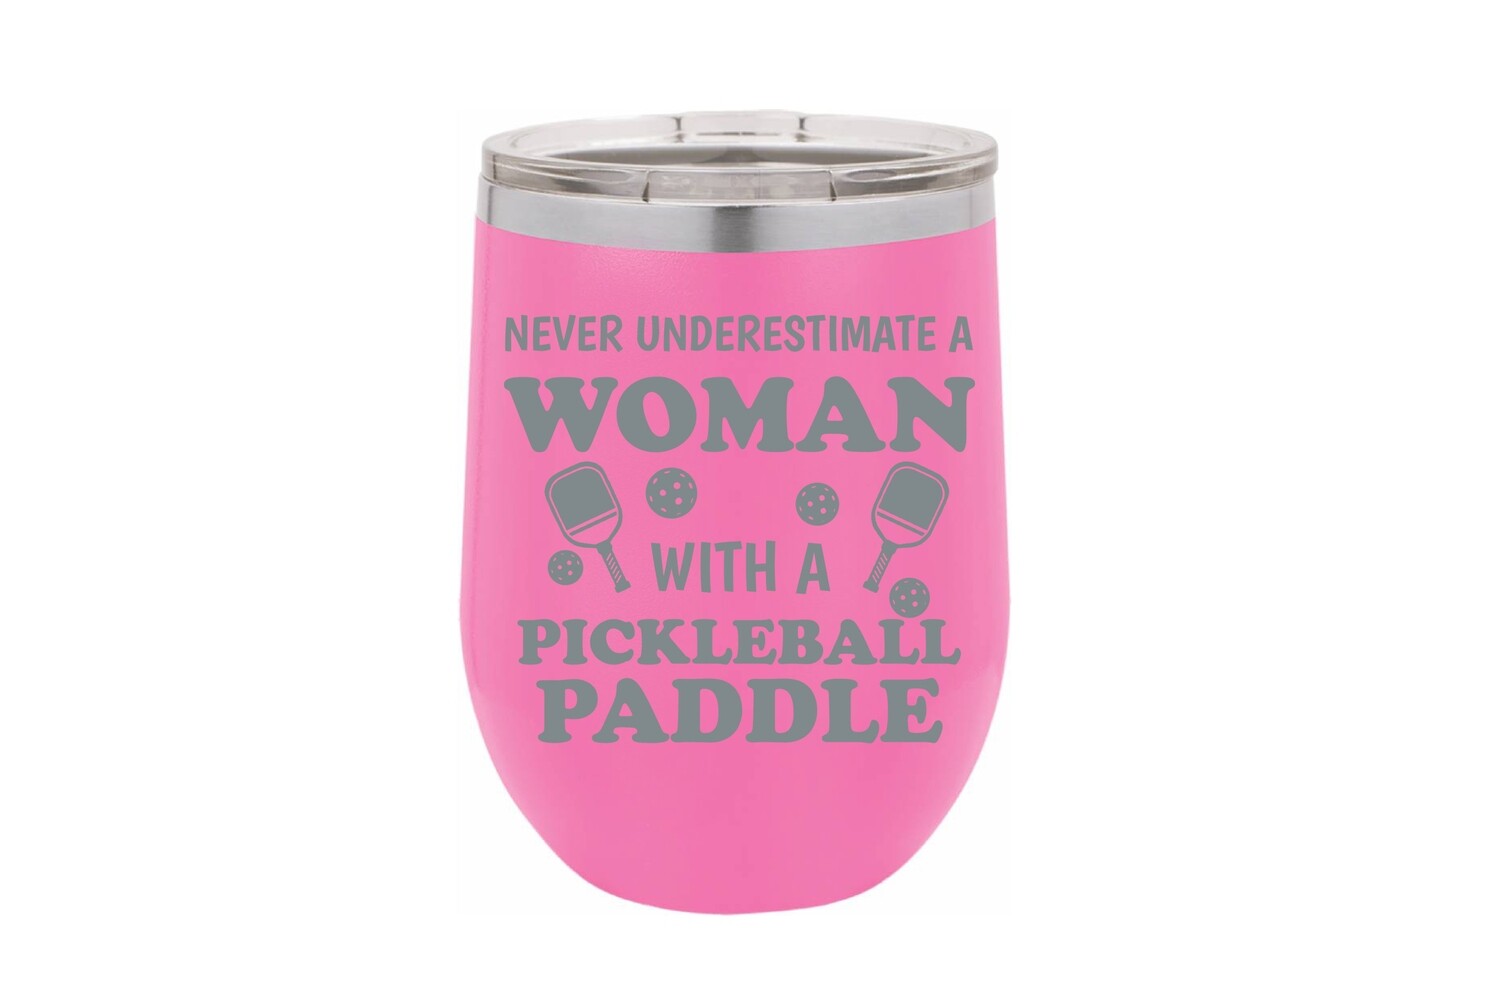 Never Underestimate a Woman with a Pickleball Paddle Insulated Tumbler 12 oz